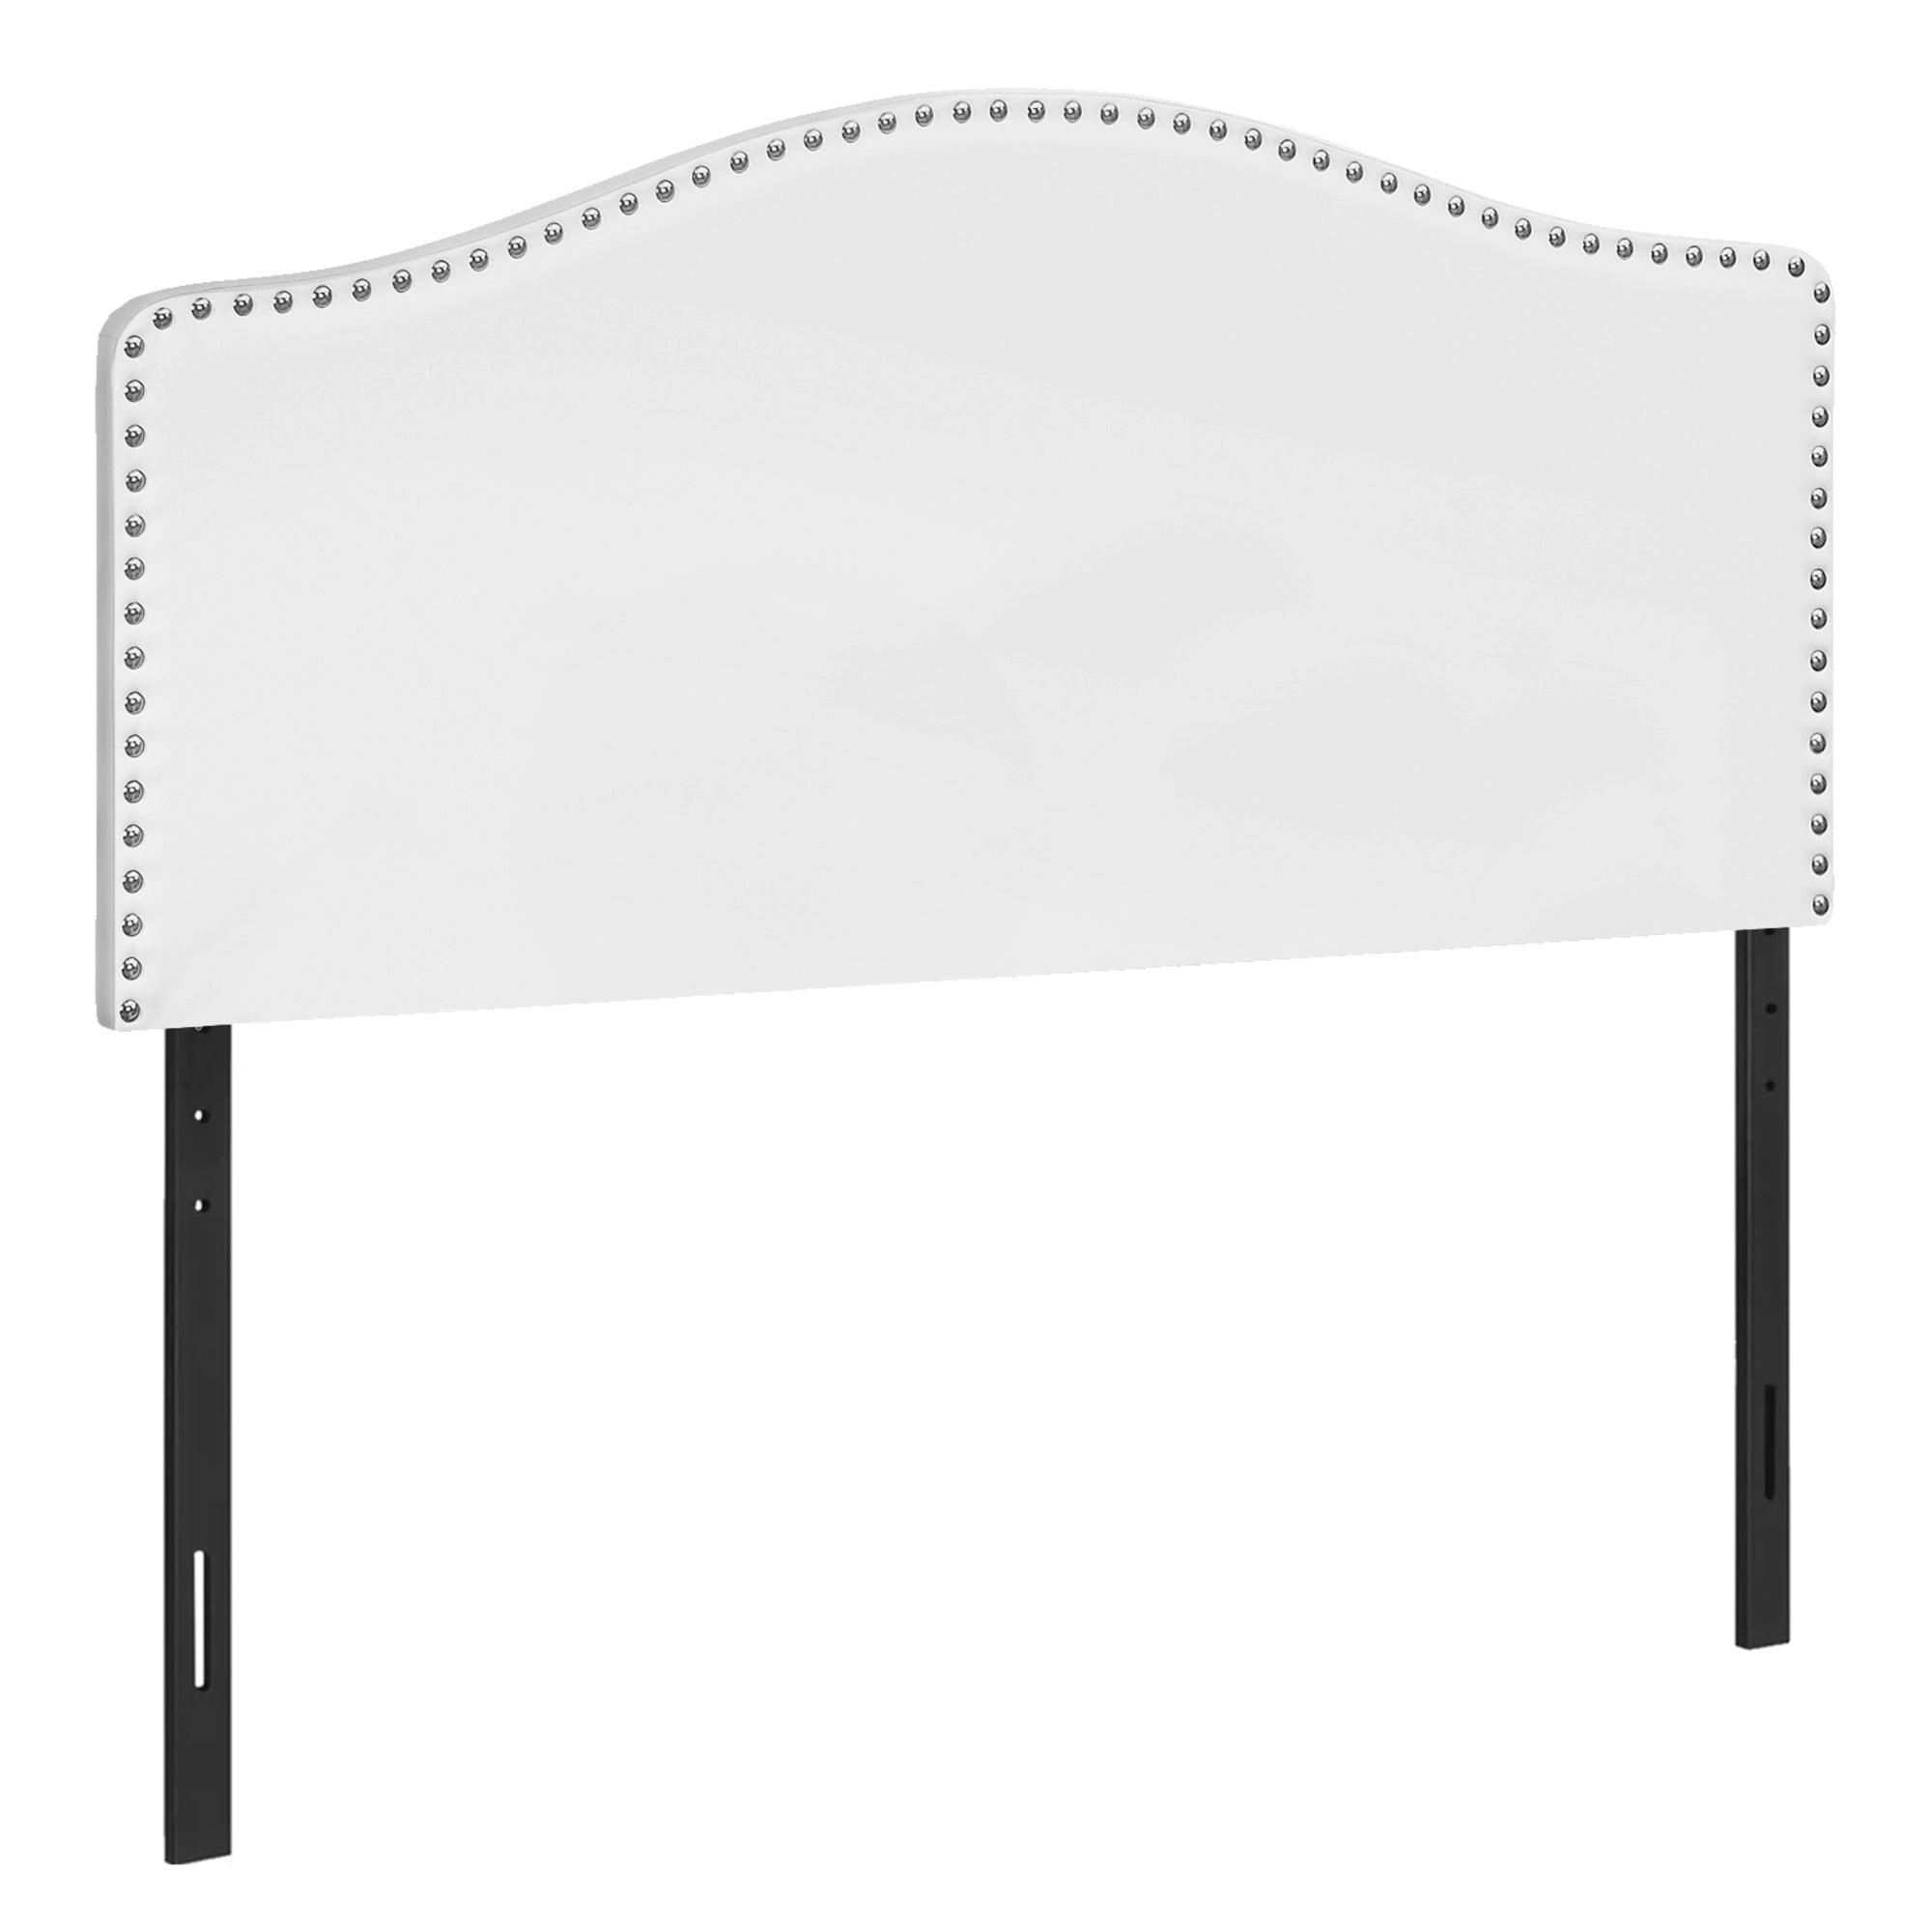 MN-526012F    Headboard, Bedroom, Full Size, Upholstered, Leather Look, Wooden Frame, White, Black, Contemporary, Modern